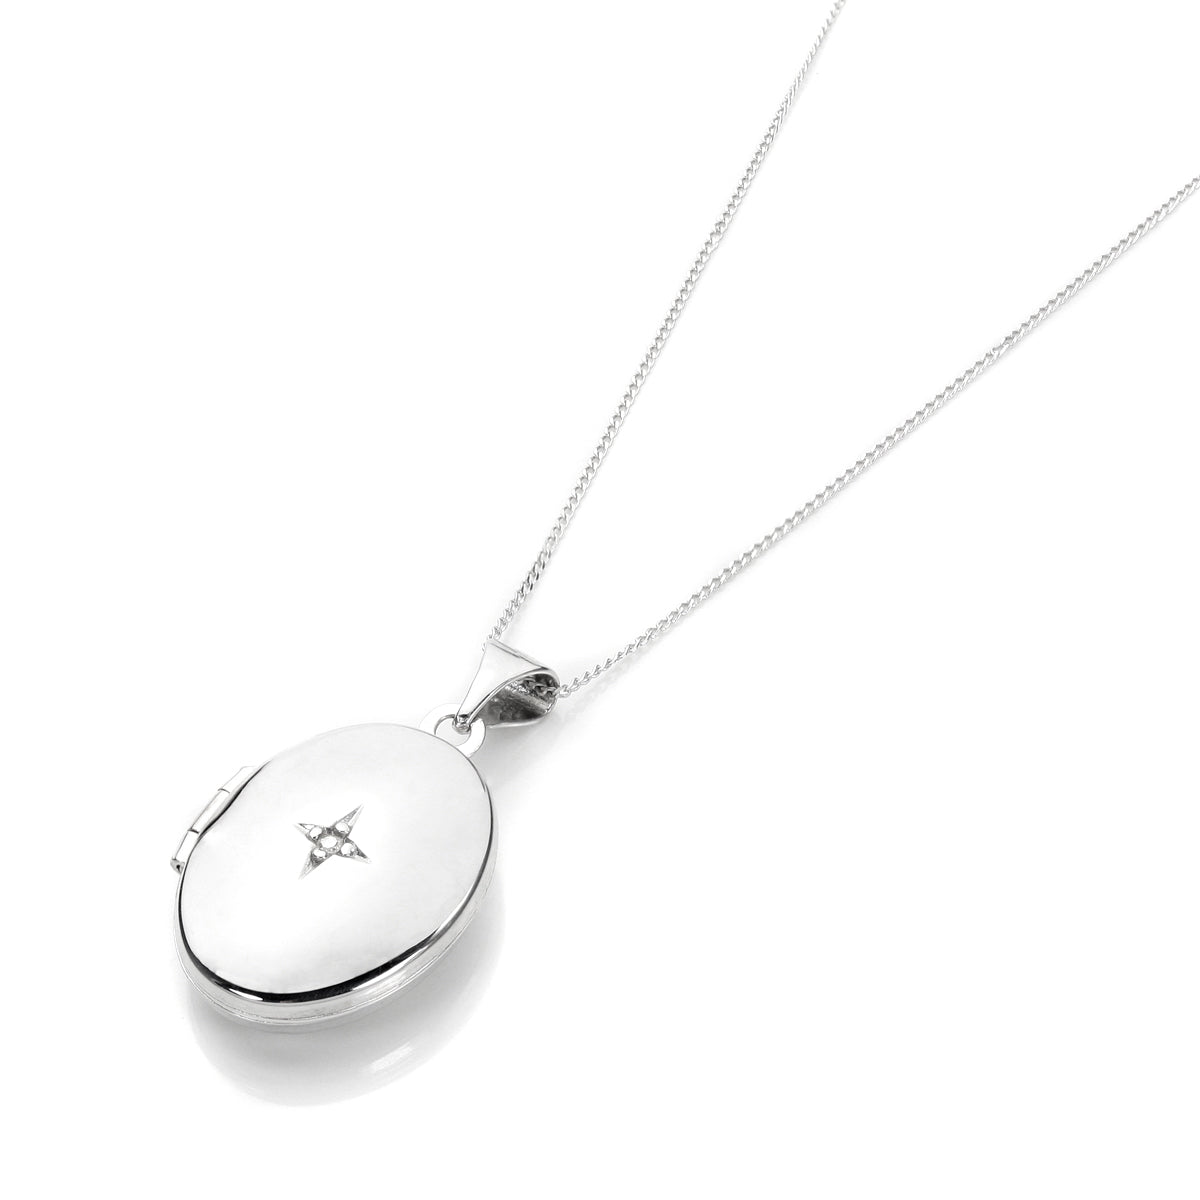 White Gold Oval Locket with Diamond